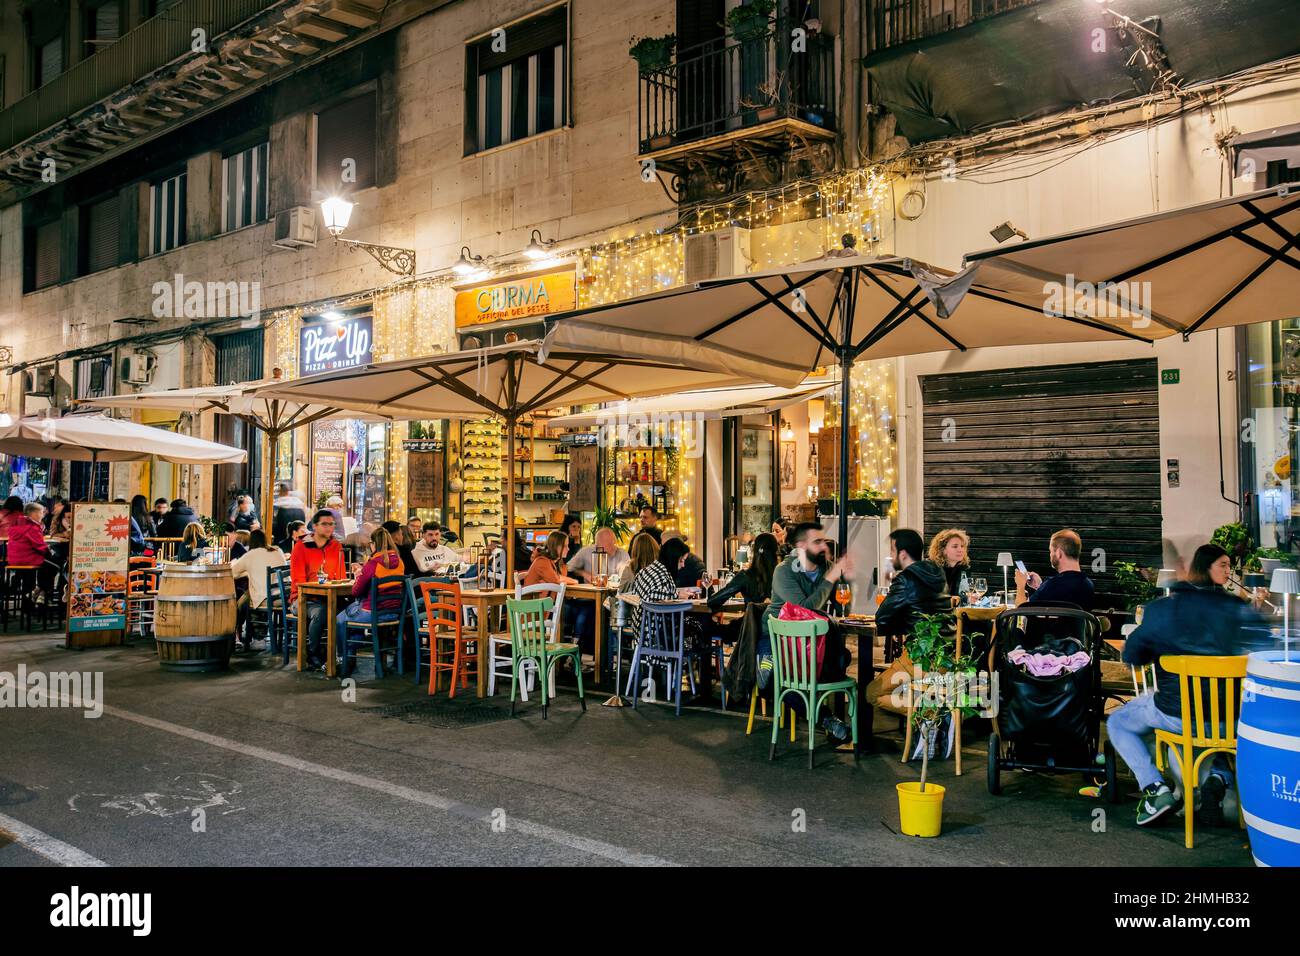 Restaurant terrace on Via Maqueda in the old town at night, Palermo, Sicily, Italy Stock Photo